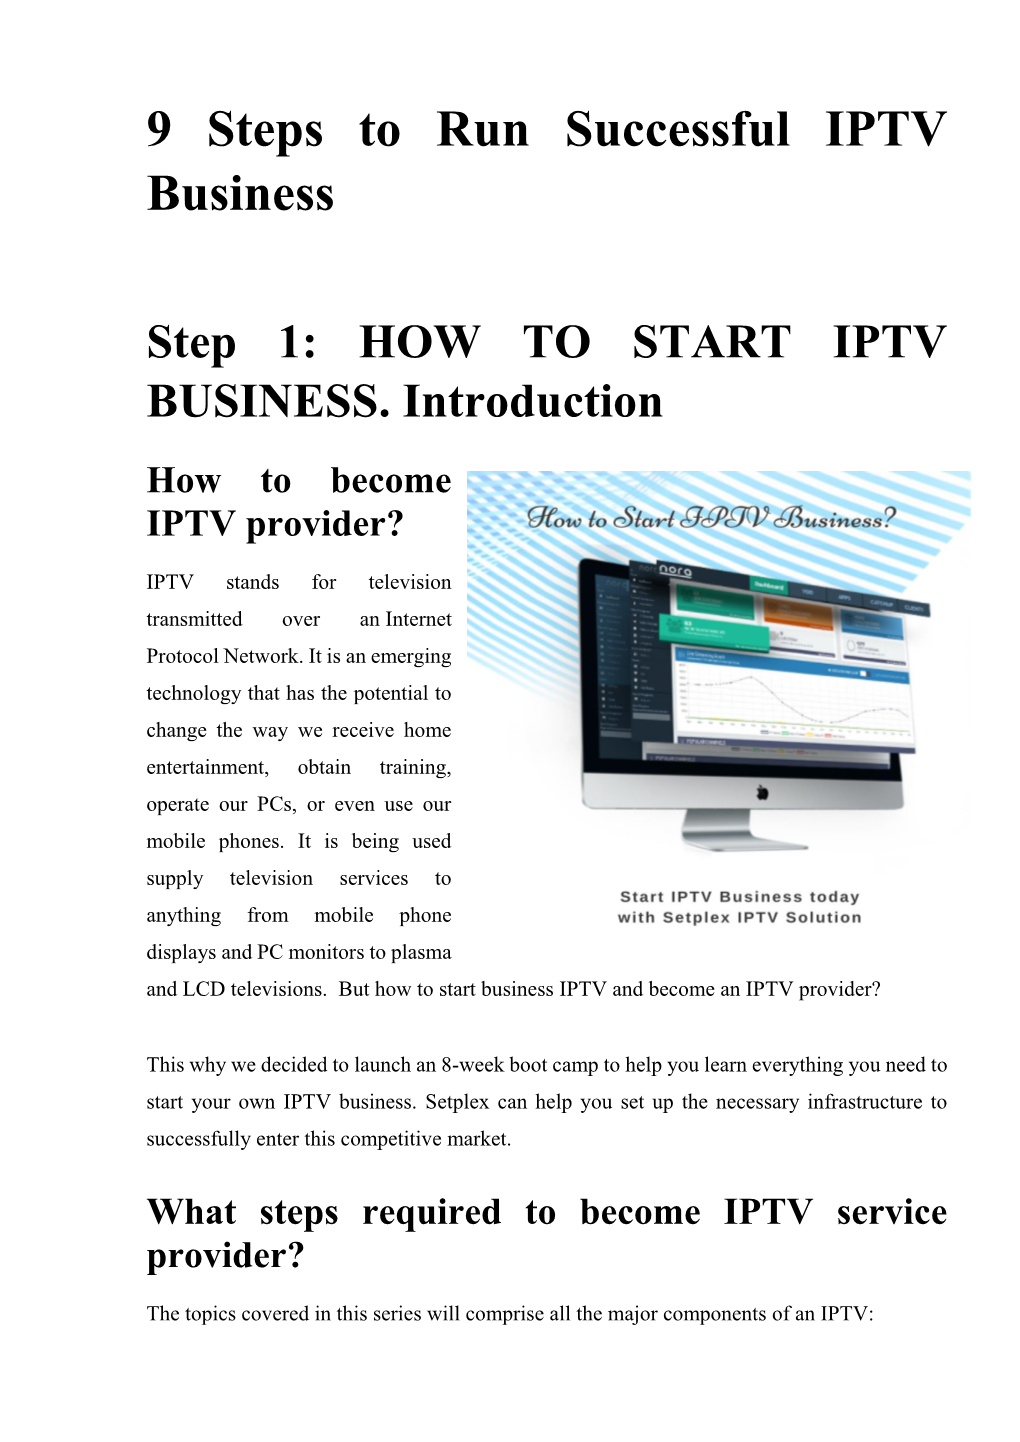 9 Steps to Run Successful IPTV Business